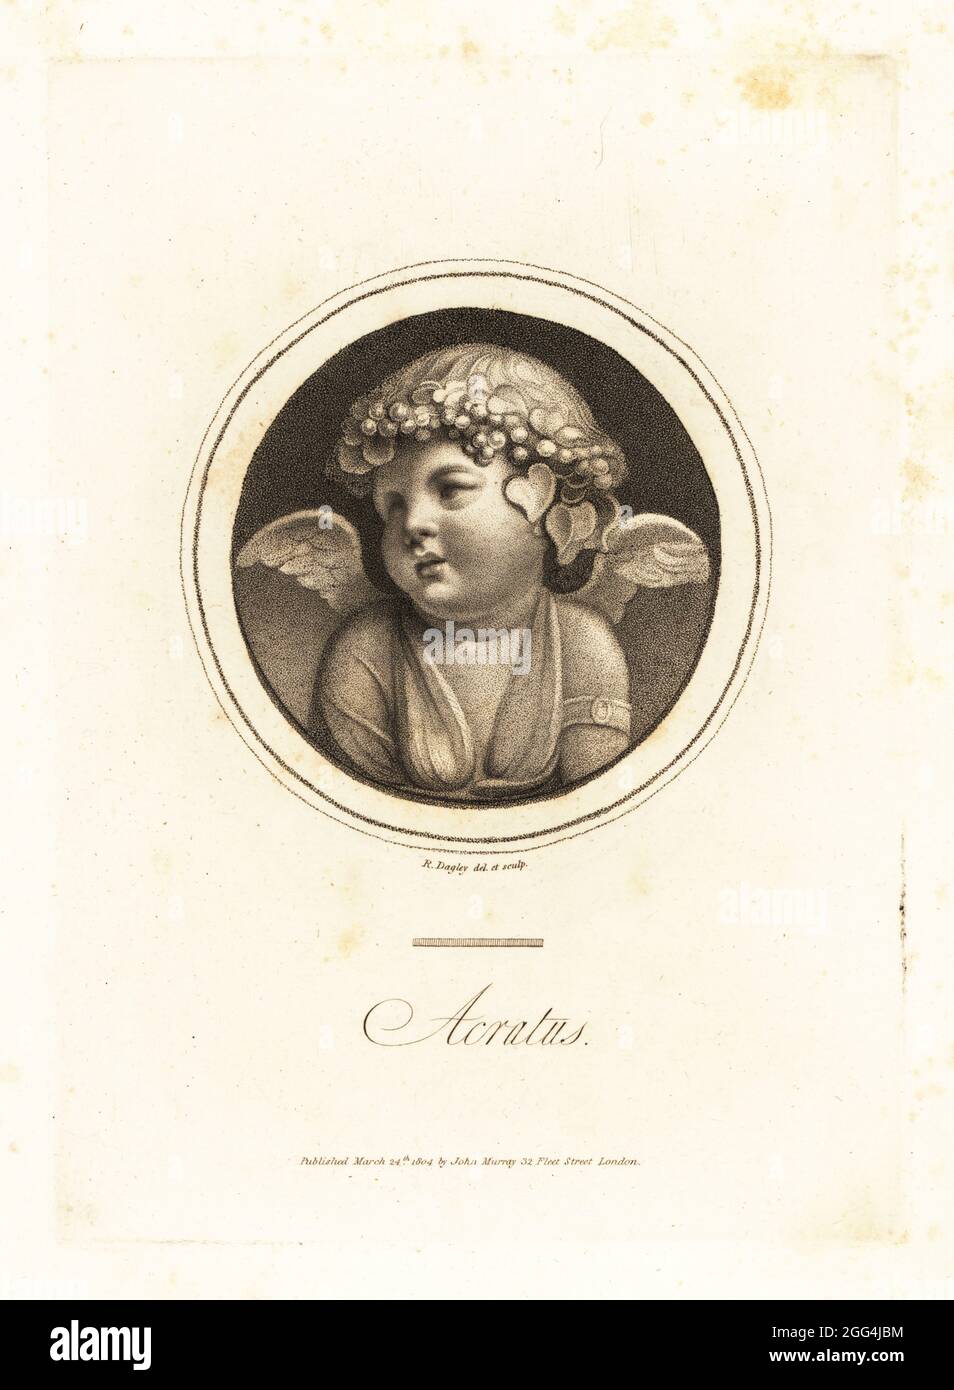 Acratus or Acratopotes, a winged Bacchus with myrtle, ivy and rosebud crown. Genius of pure wine and companion of Bacchus or Dionysus. From a purple amethyst gem. Copperplate engraving drawn and engraved by Richard Dagley from Gems, Selected from the Antique, with Illustrations, John Murray, London, 1804. Stock Photo